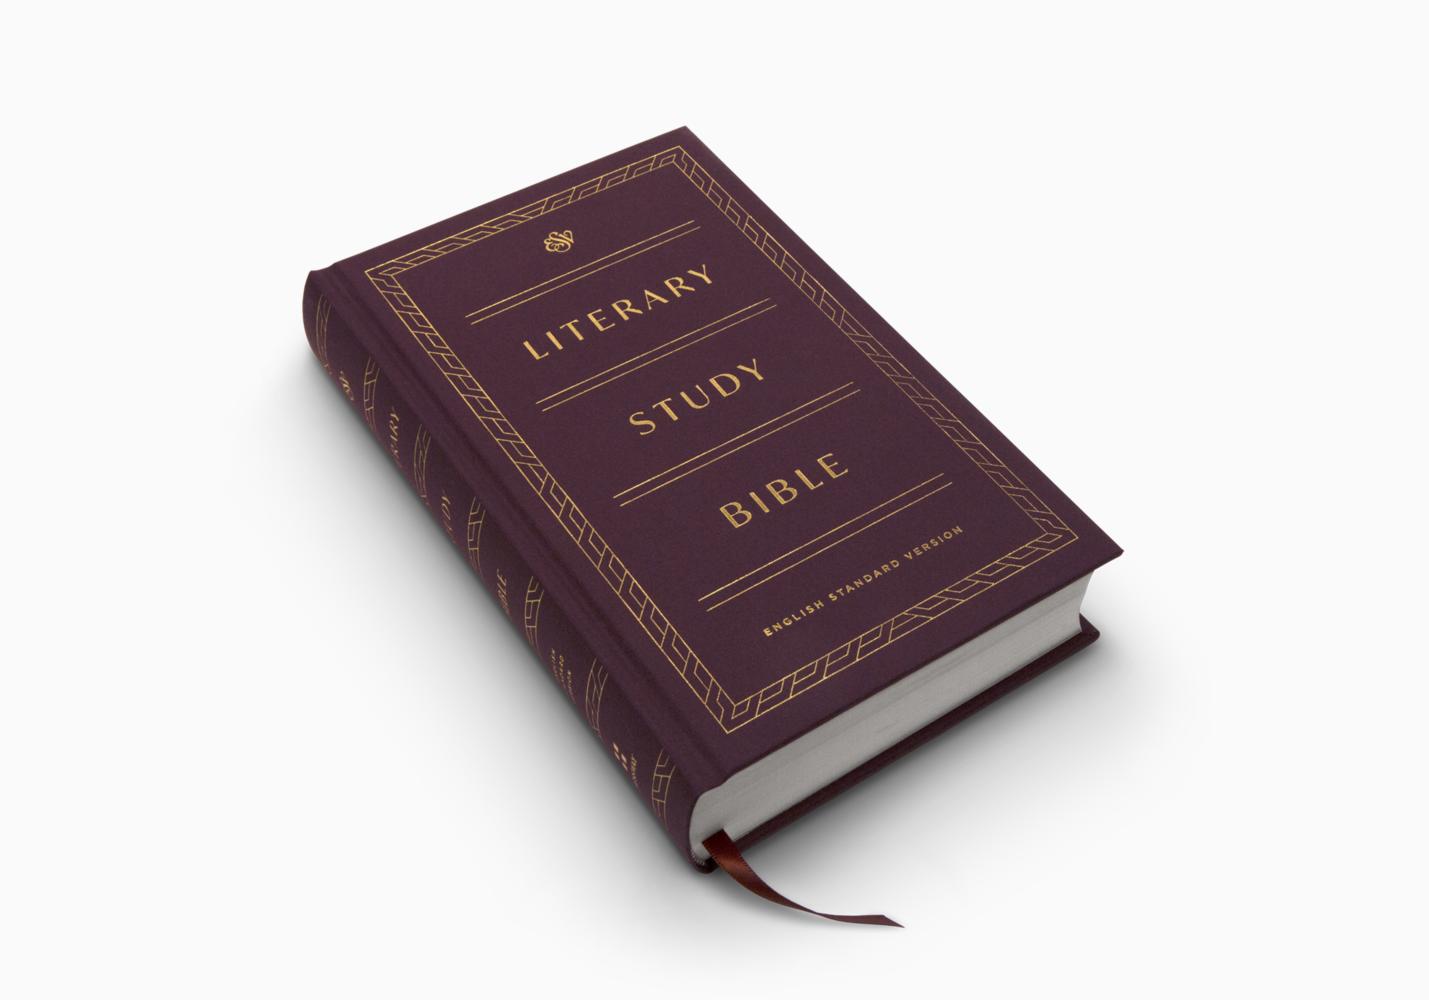 Image of ESV Literary Study Bible (Cloth over Board) other